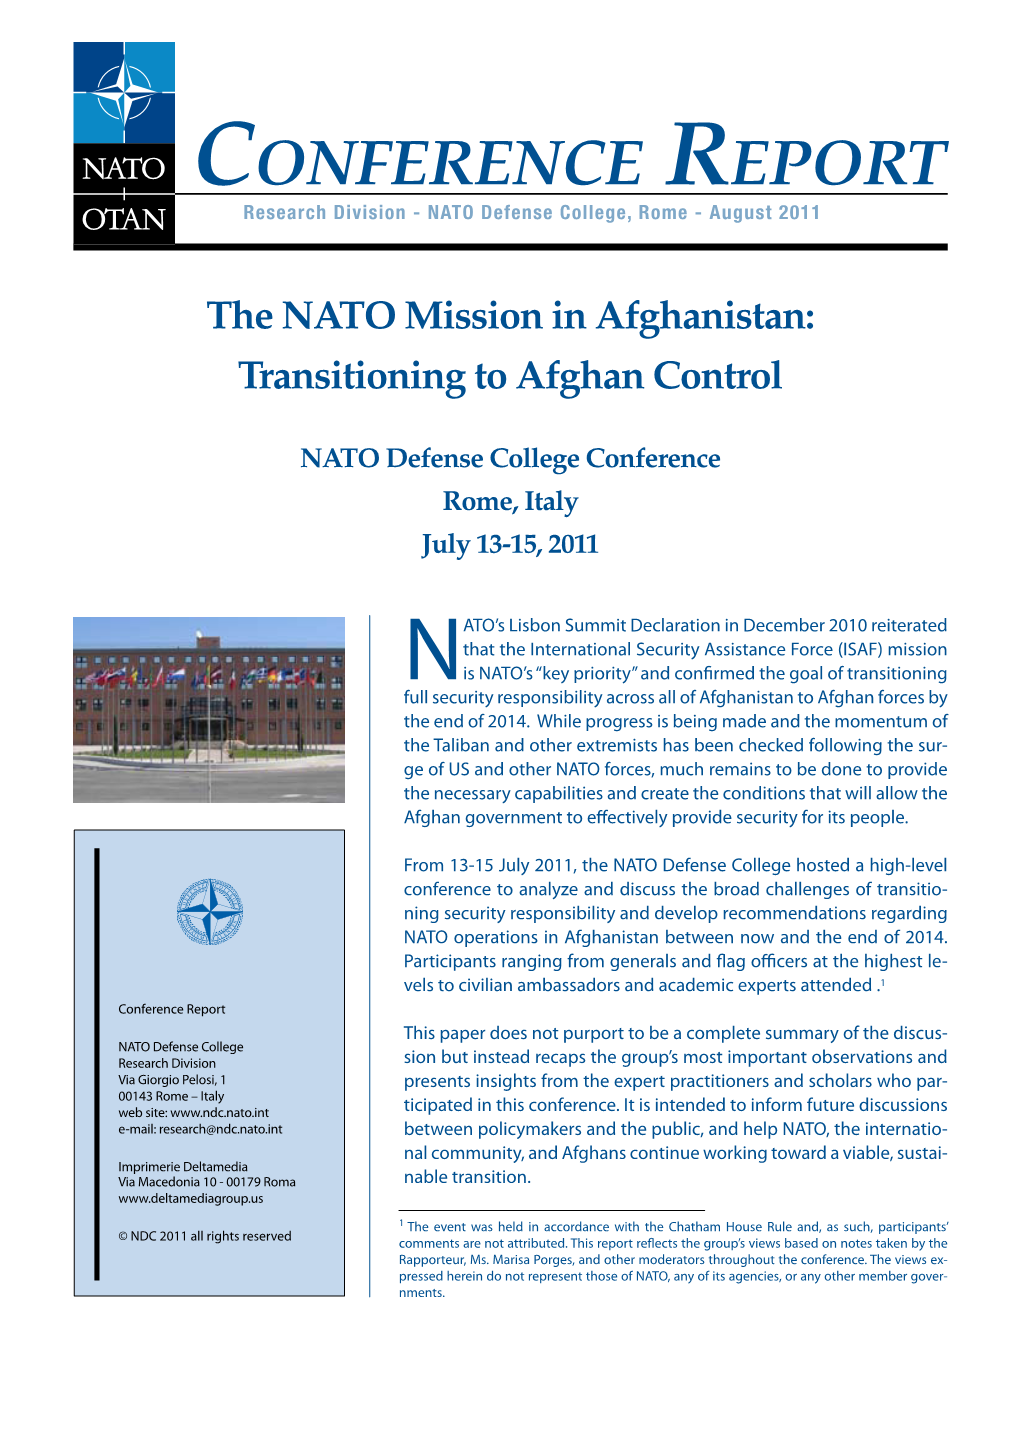 The NATO Mission in Afghanistan: Transitioning to Afghan Control